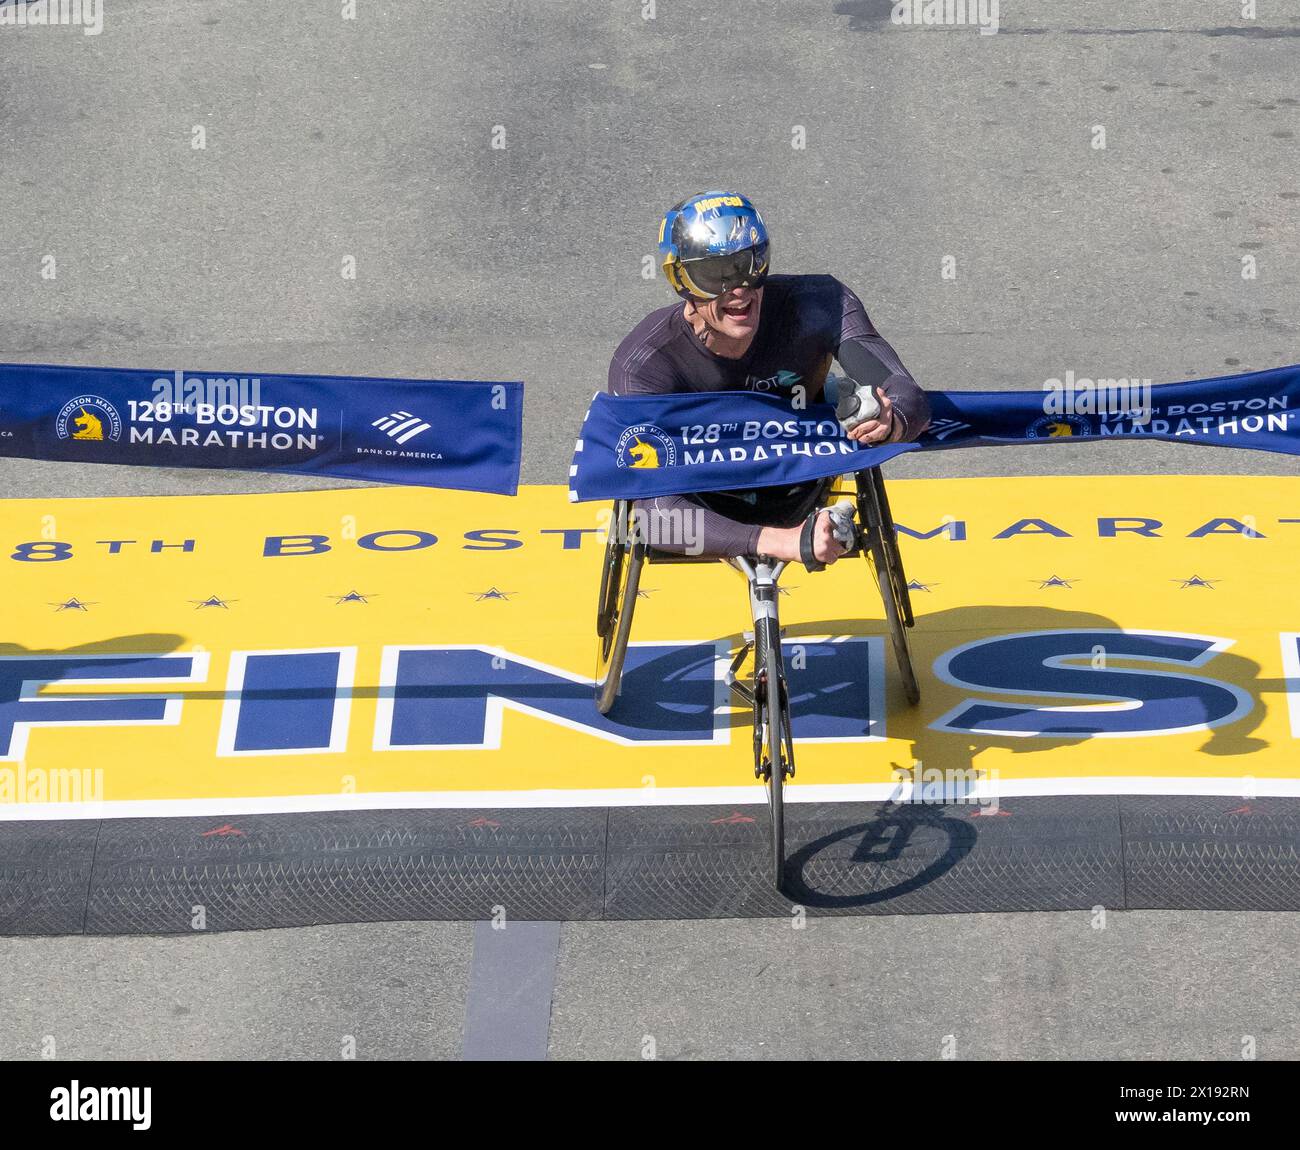 Boston, Massachusetts, USA  April 15, 2024 Marcel Hug of Sweden crossing the finish line in record time of the Mens Wheelchair division of the 128 running of the Boston Marathon in Copley Square, Boston, Massachusetts, USA on April 15, 2024. HugÕs record setting time on the 26.2 mile course was 1:15;33  ( Rick Friedman) Stock Photo